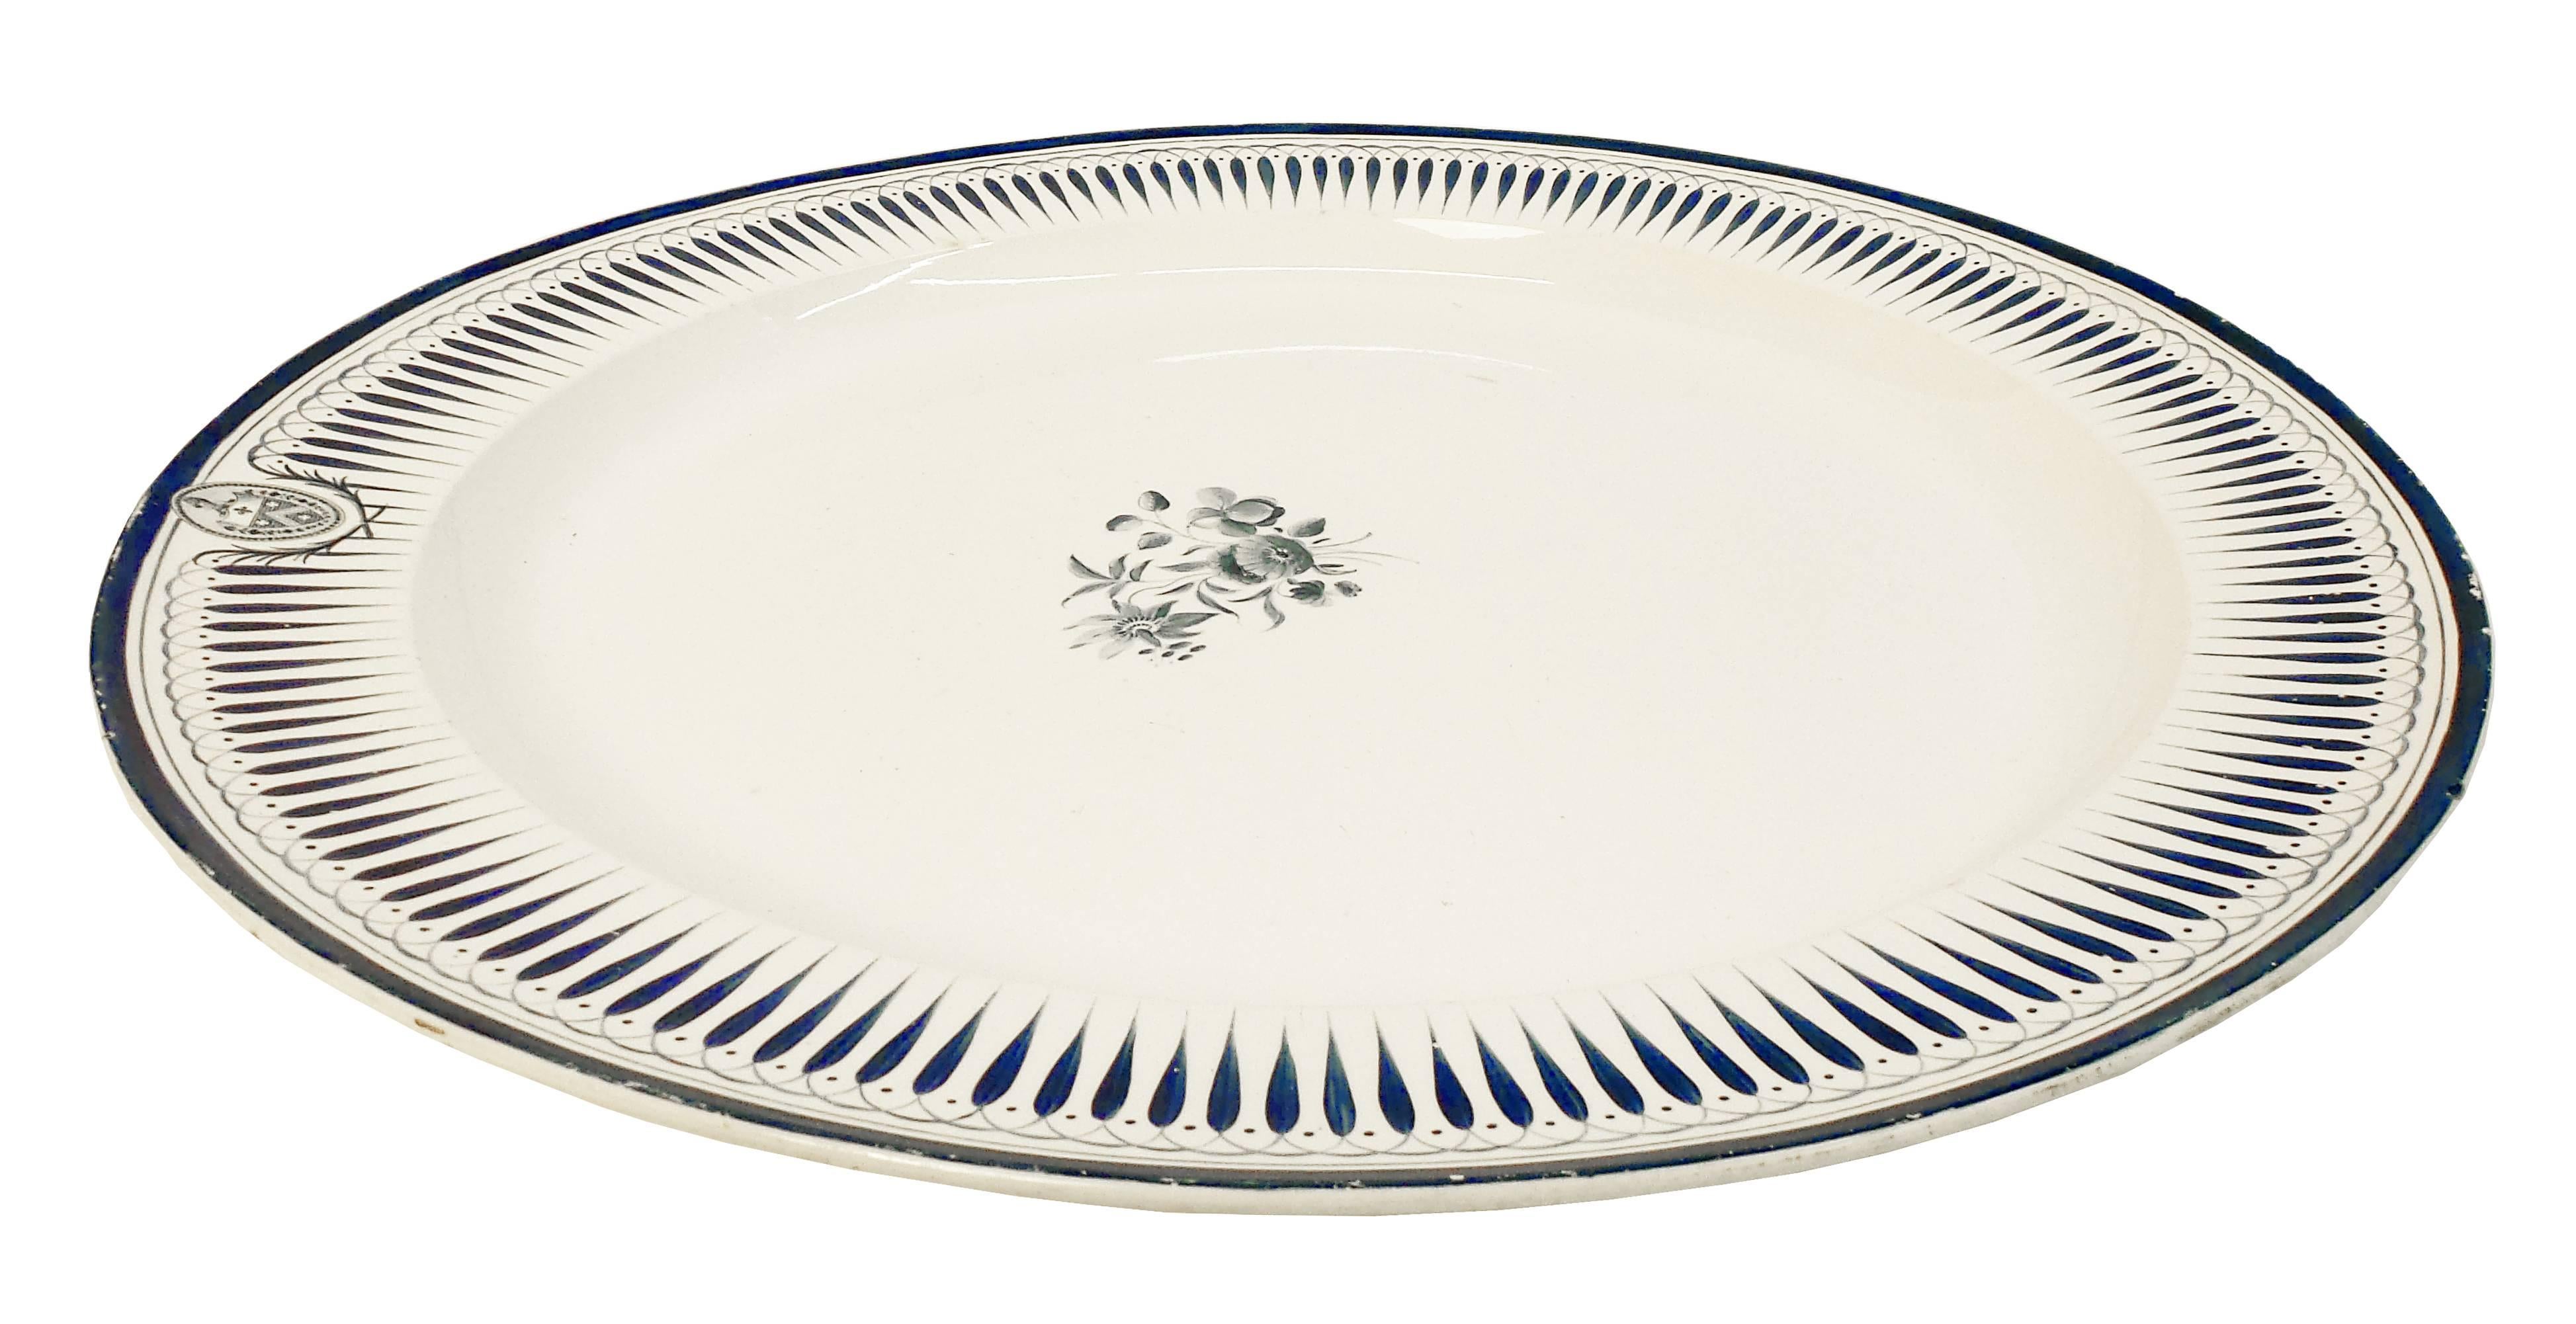 Large Wedgewood Serving Platter In Excellent Condition For Sale In Long Island City, NY